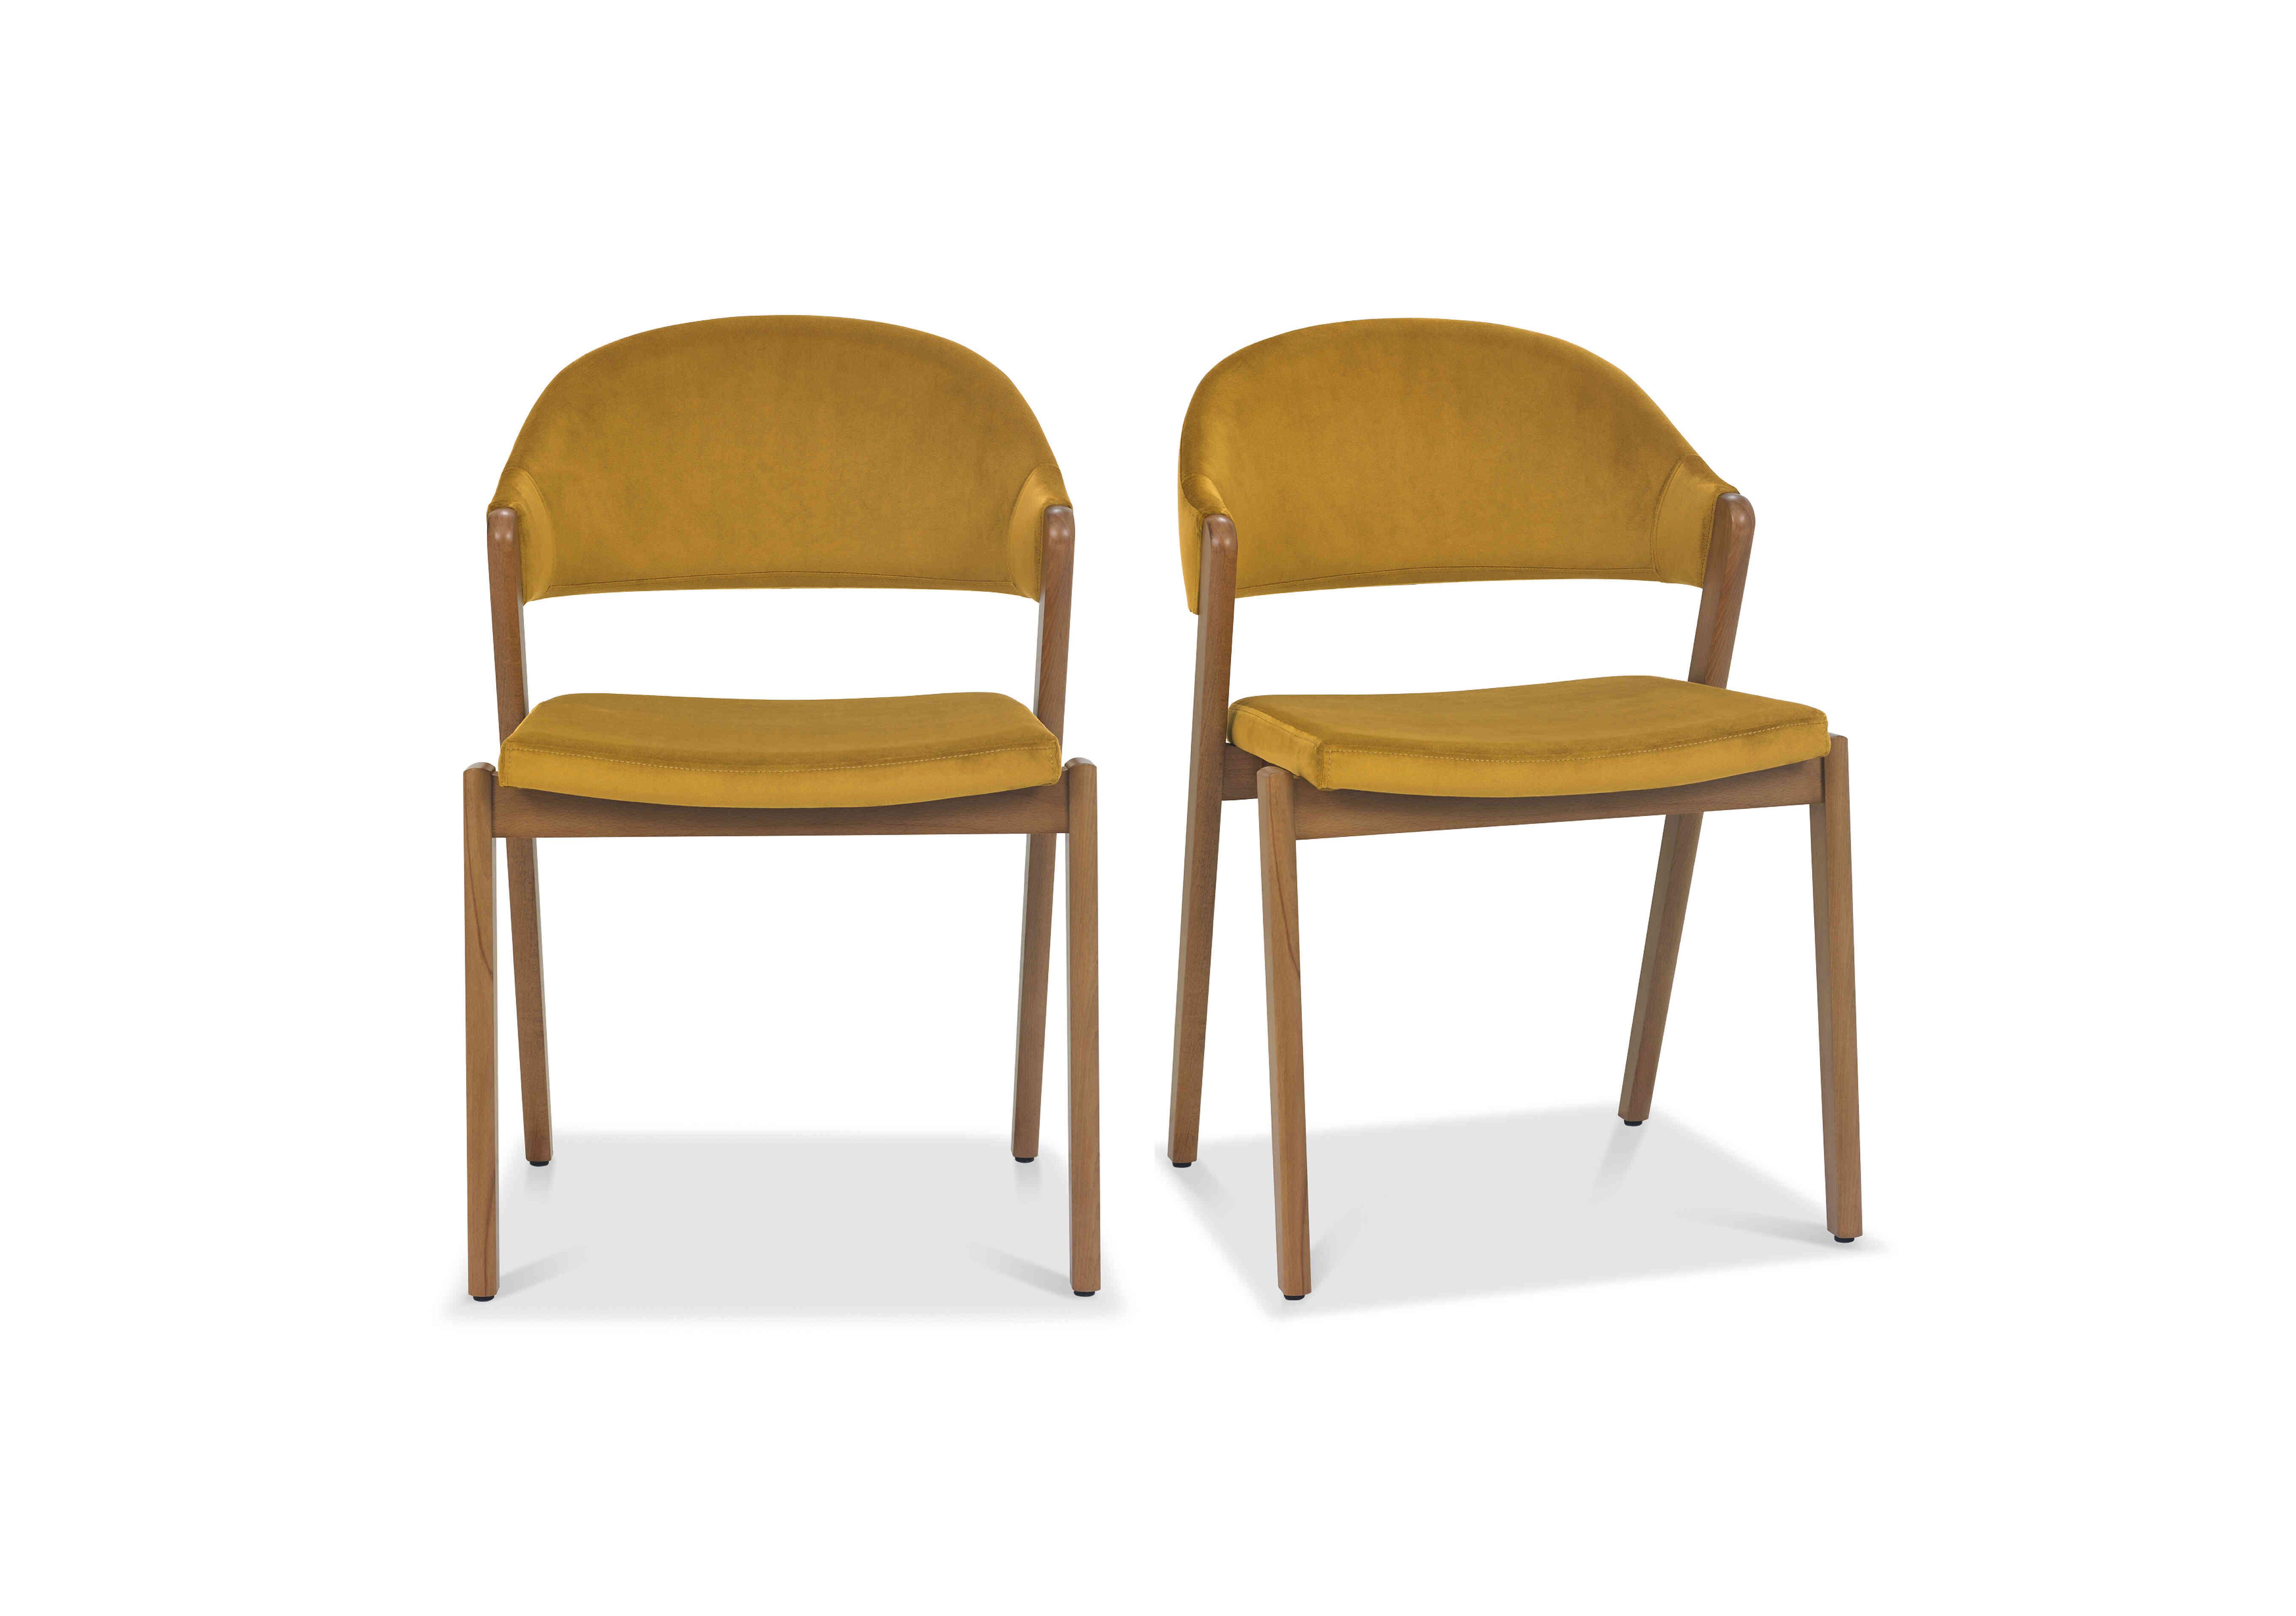 Stratford Pair of Fabric Dining Chairs in Mustard Velvet on Furniture Village